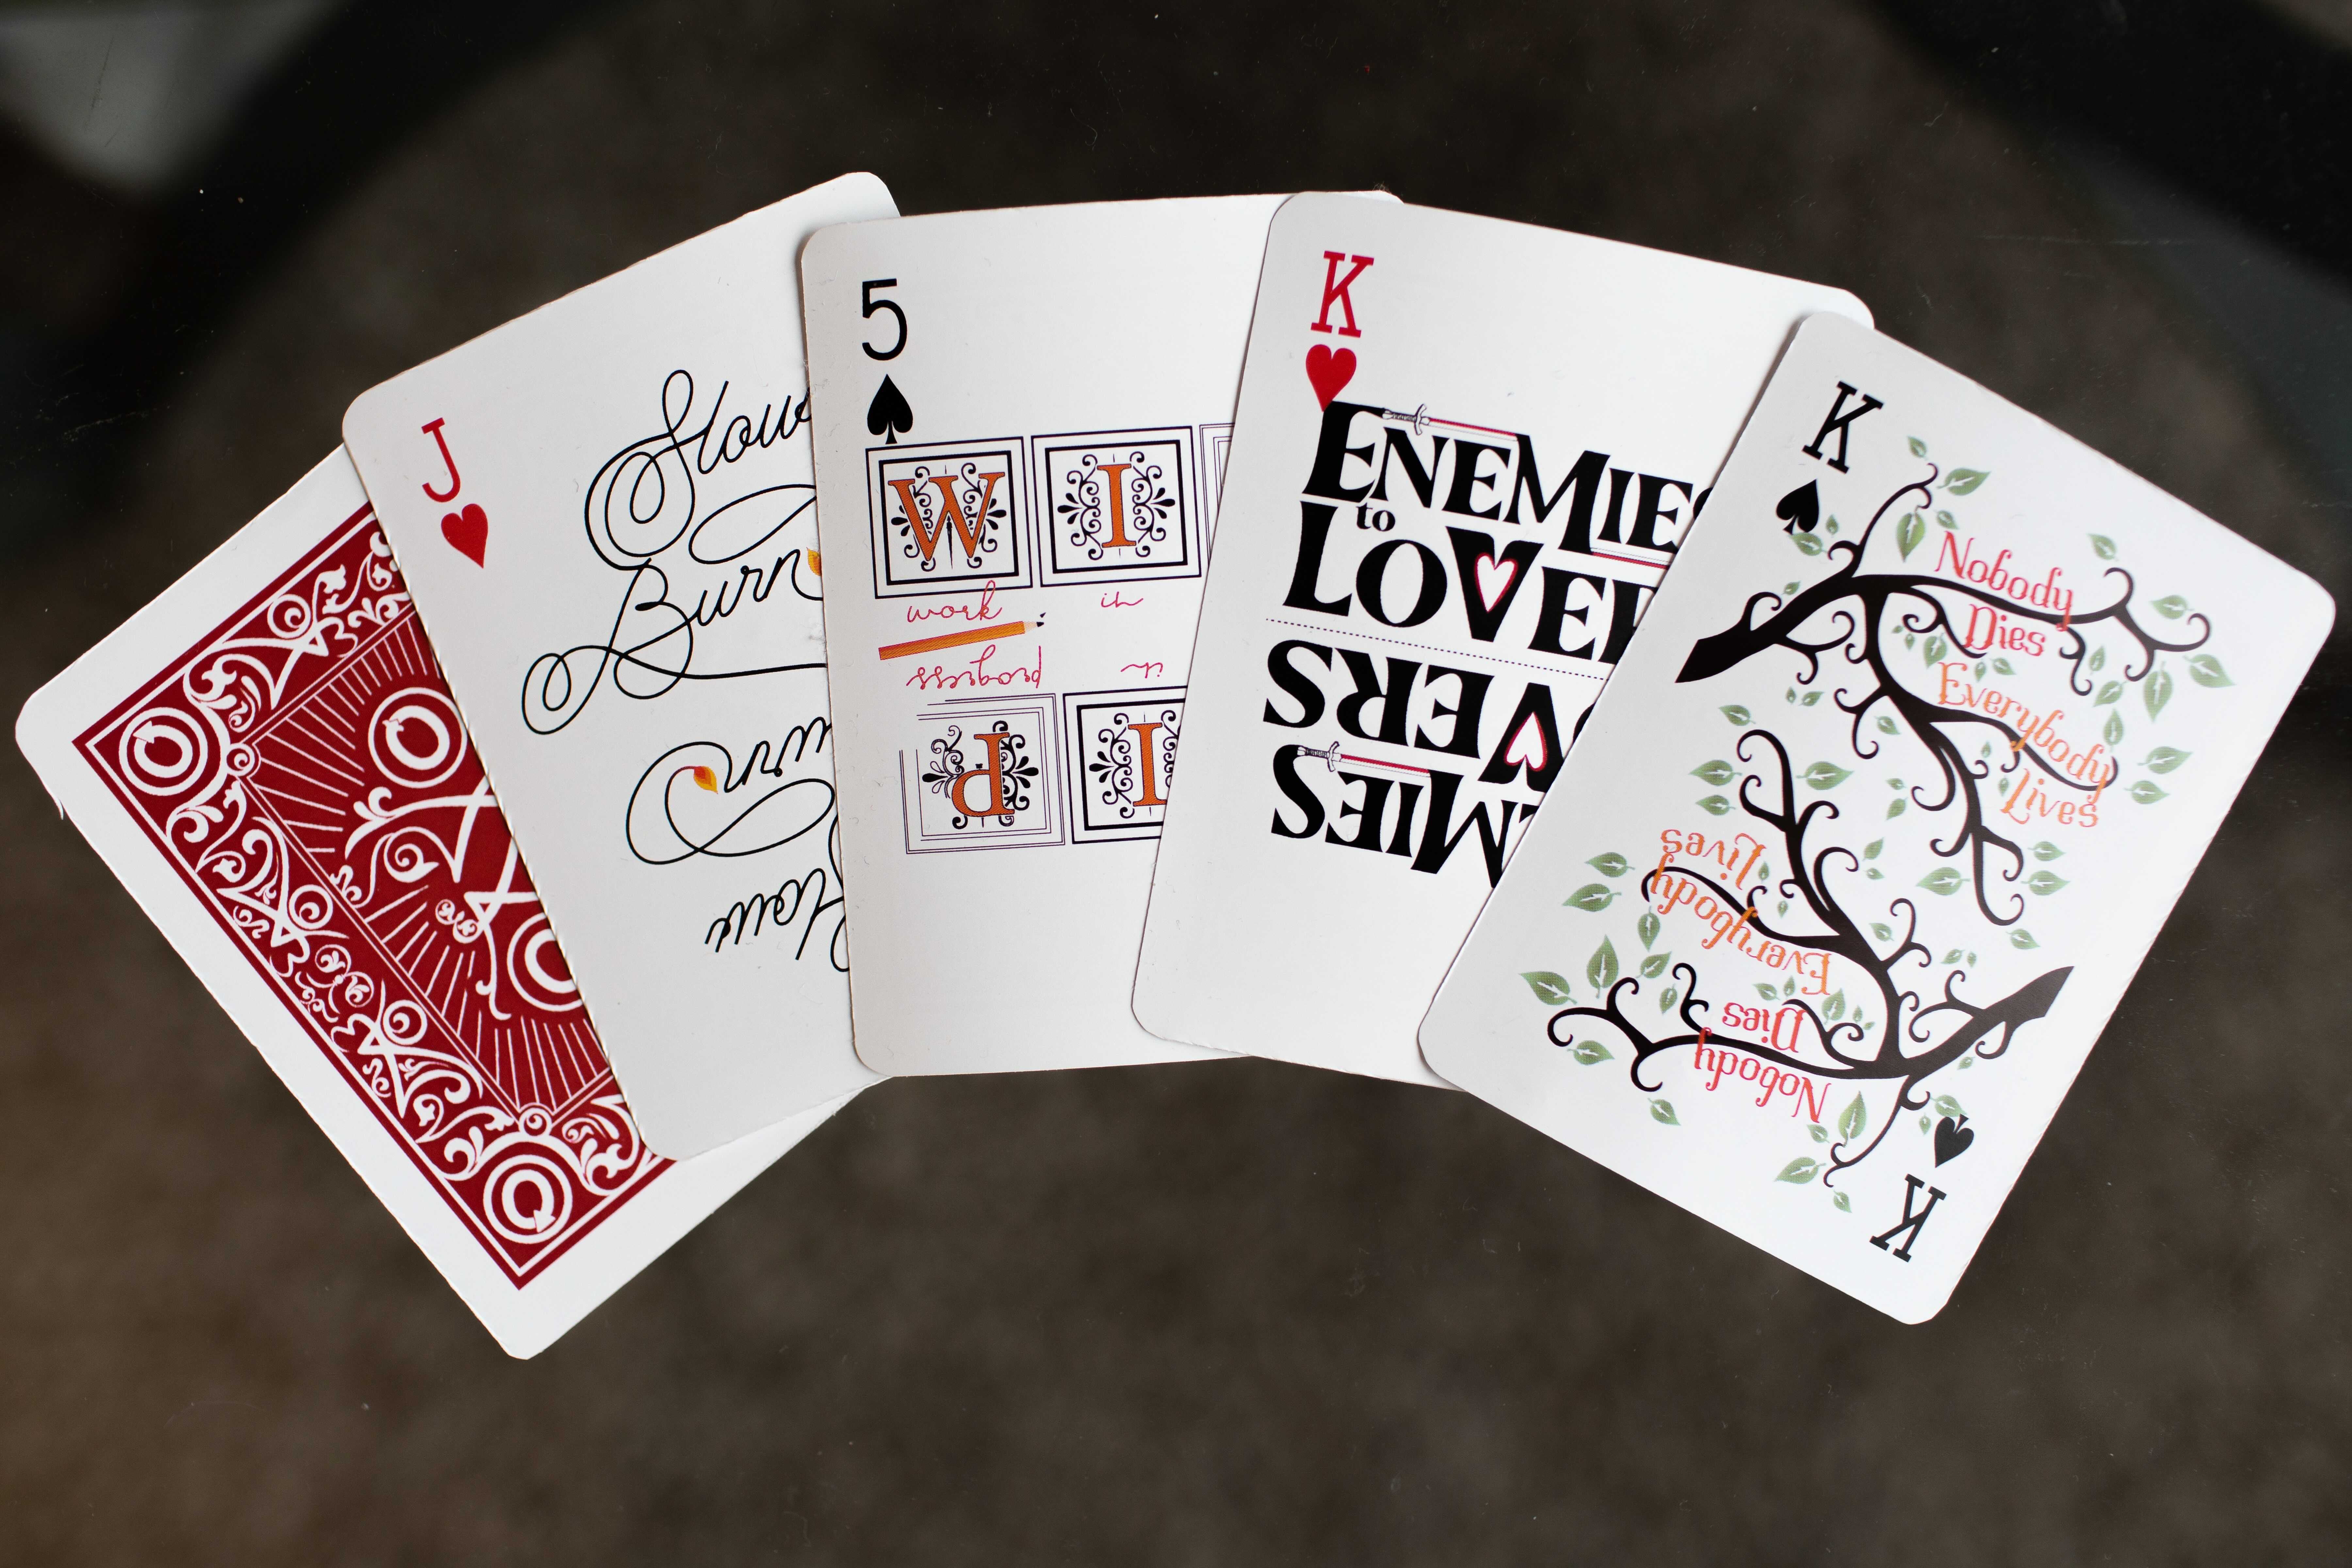 Illustrated playing cards, each representing a fannish concept: "Everybody Lives, Nobody Dies" is written on the branches of a tree, "Enemies to Lovers" is decorated with swords, the initials of "Work in Progress" are illuminated, and the last card, "Slow Burn", ends on a lit flame. A flipped-over card shows the back illustration, including the AO3 logo.